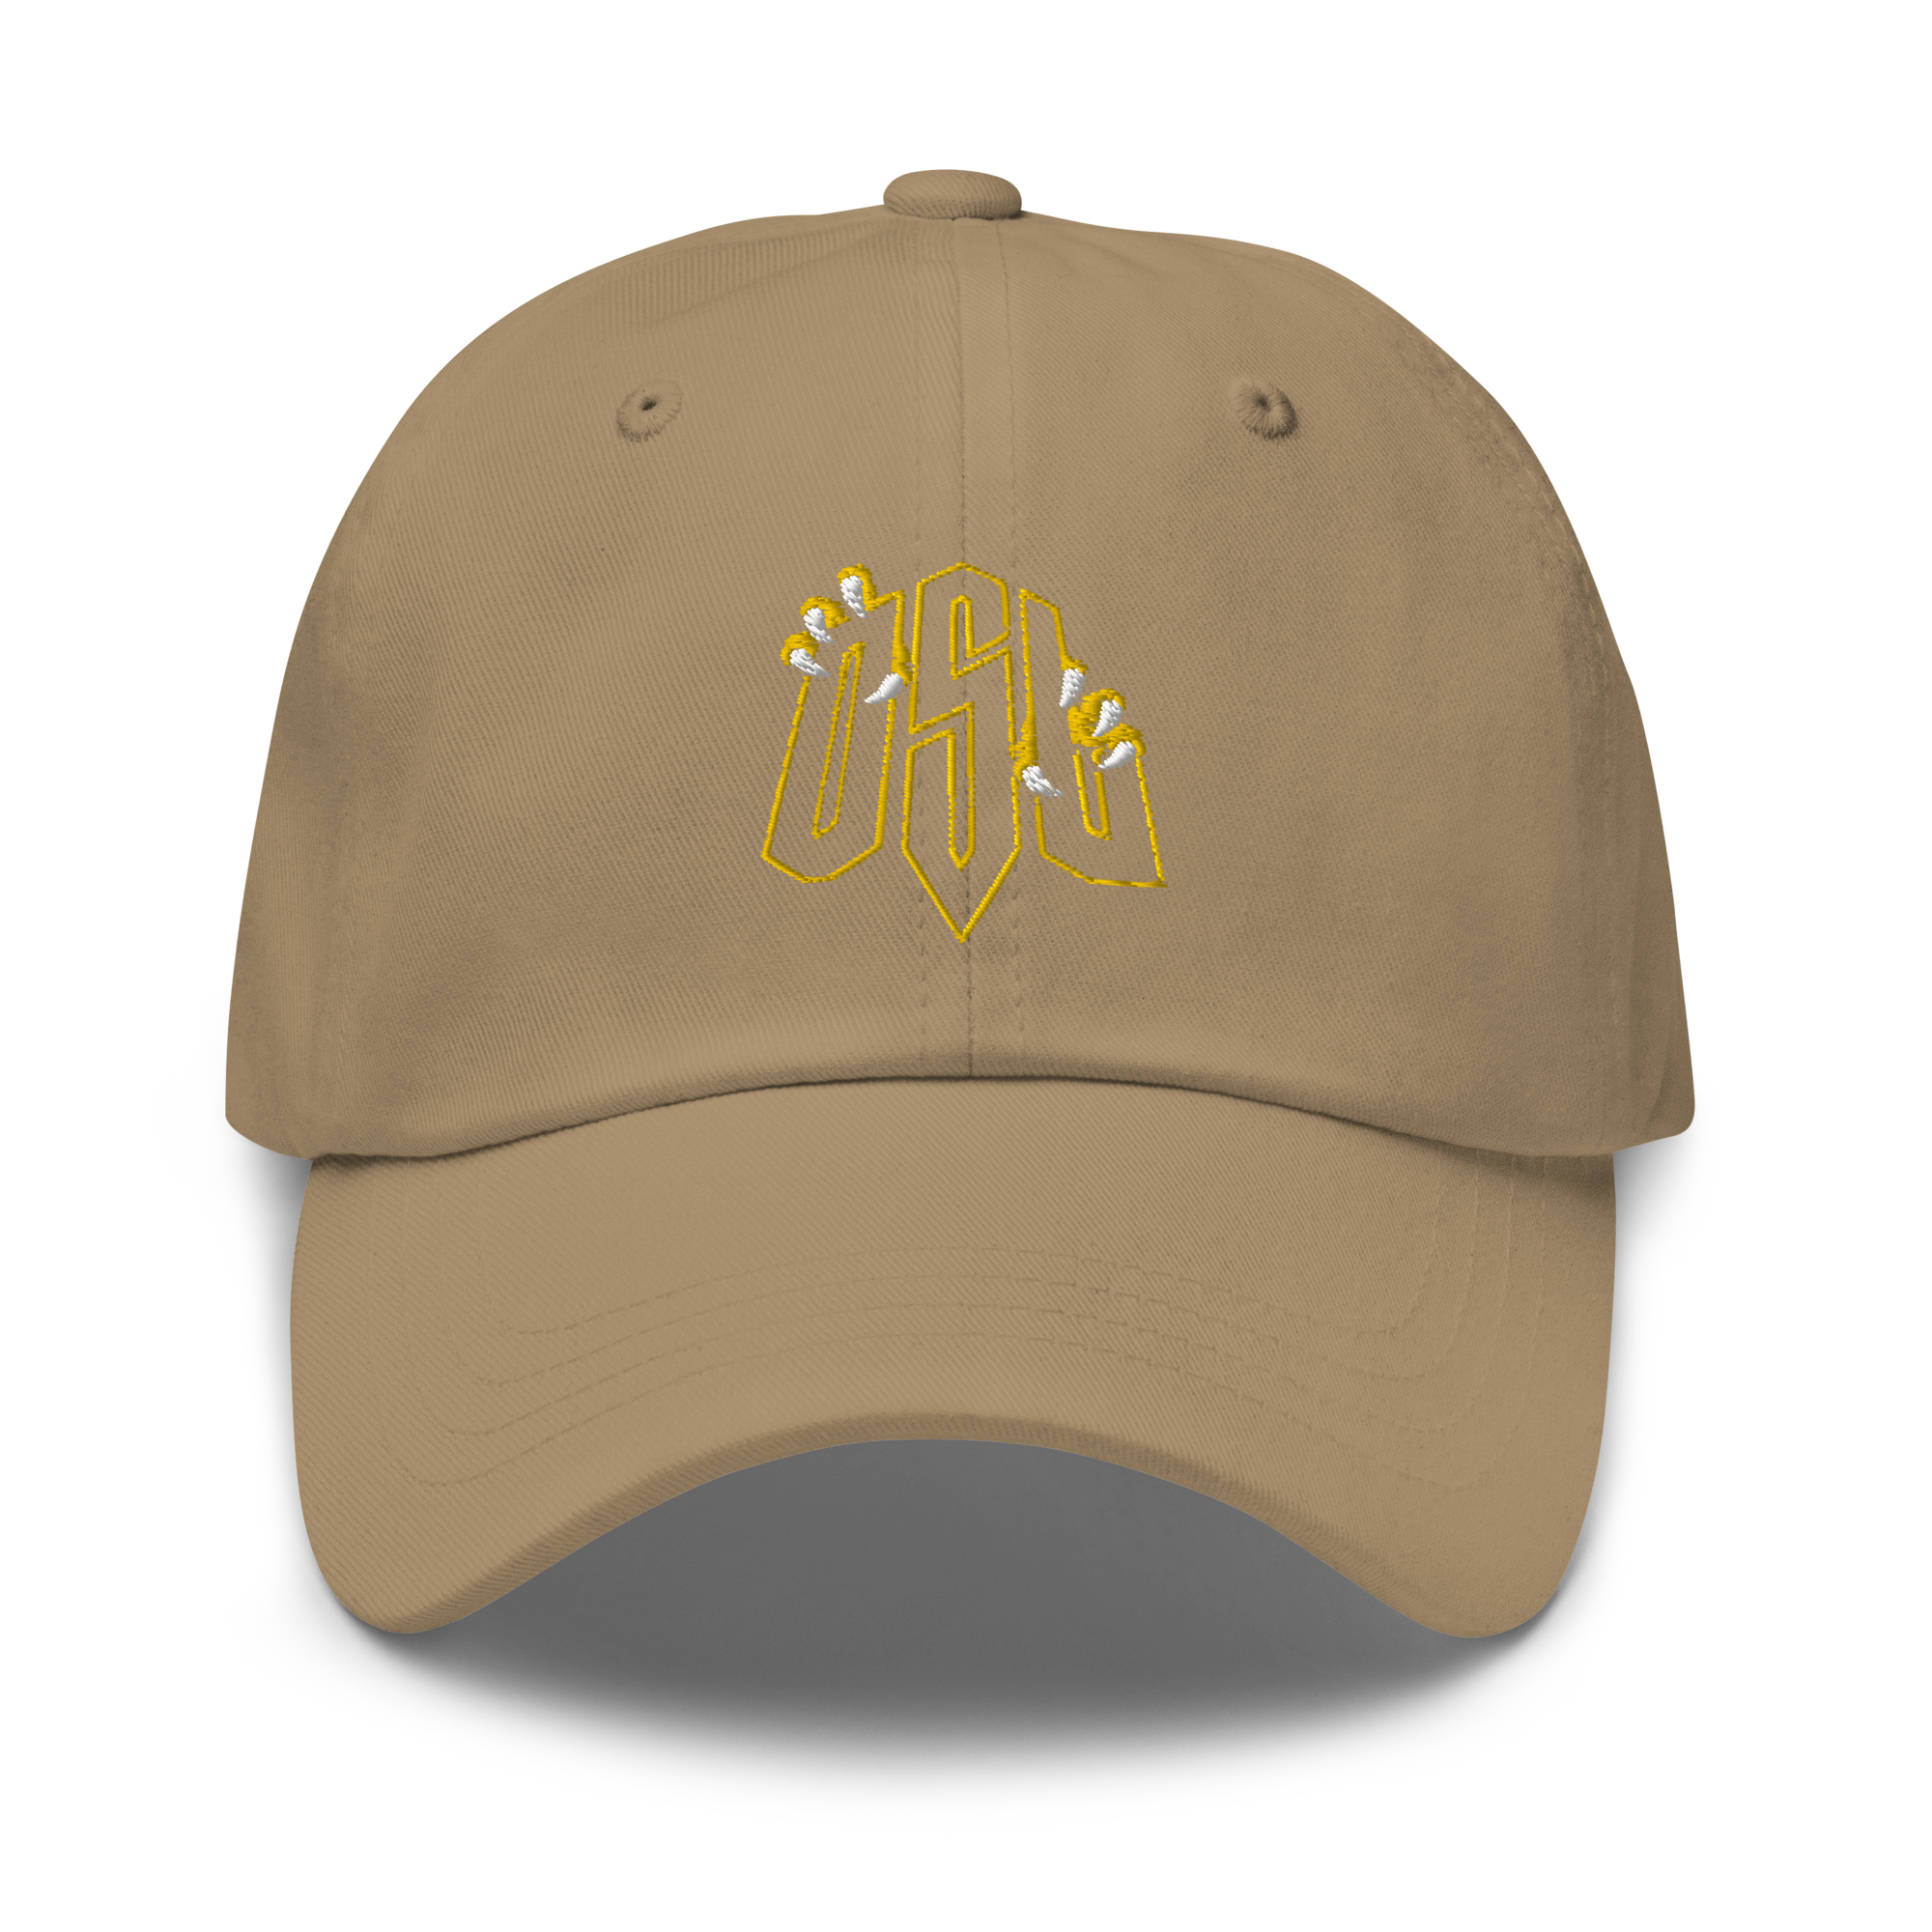 OSL Official Dad hat